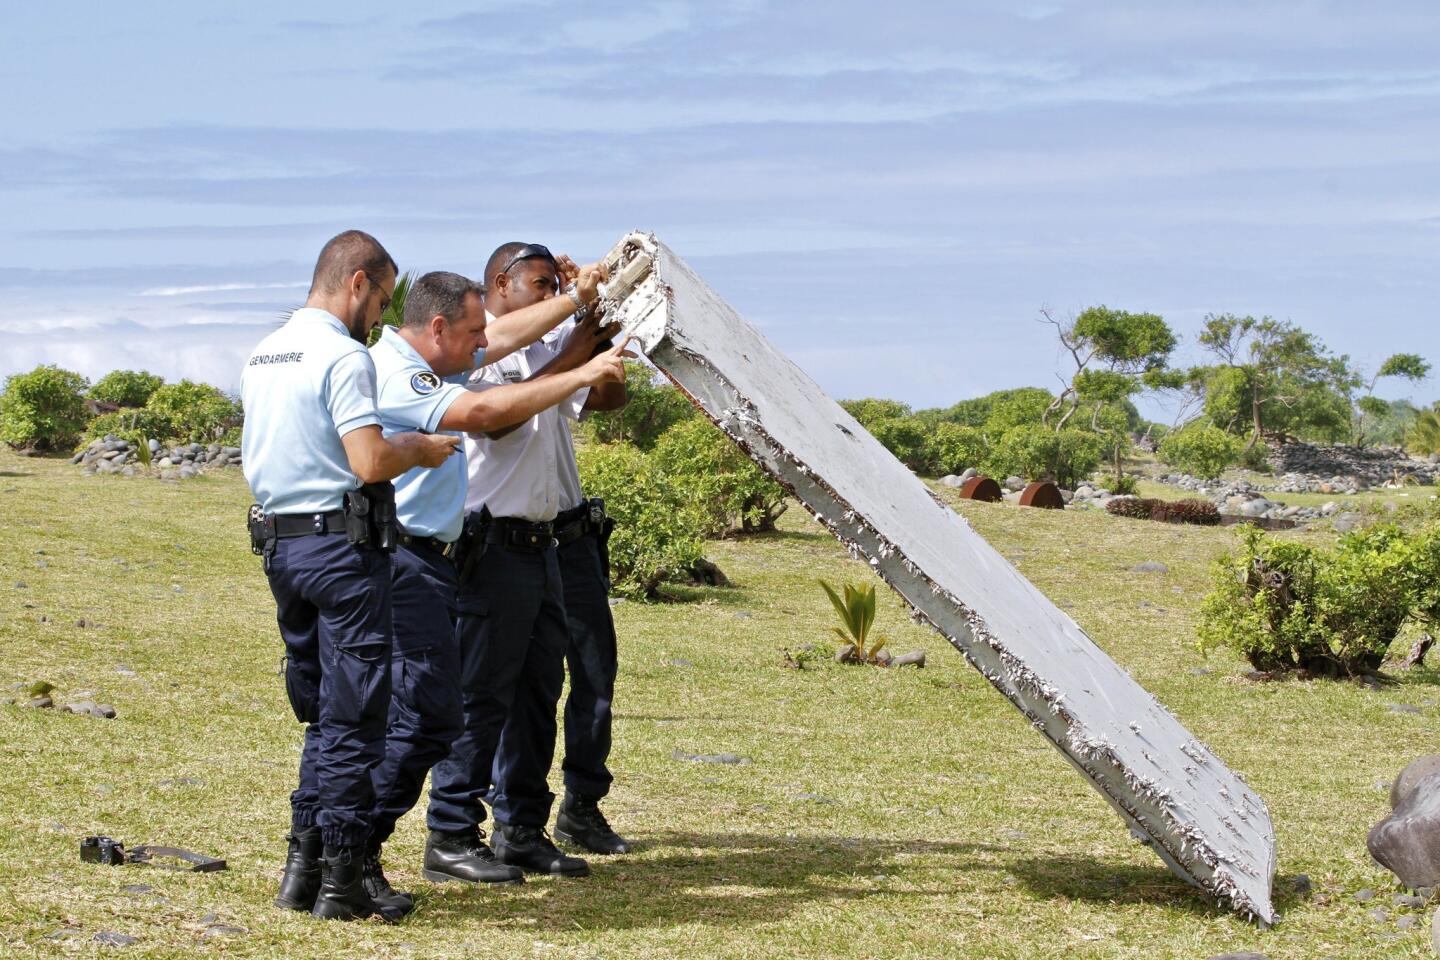 Piece of a plane washes up on Reunion Island